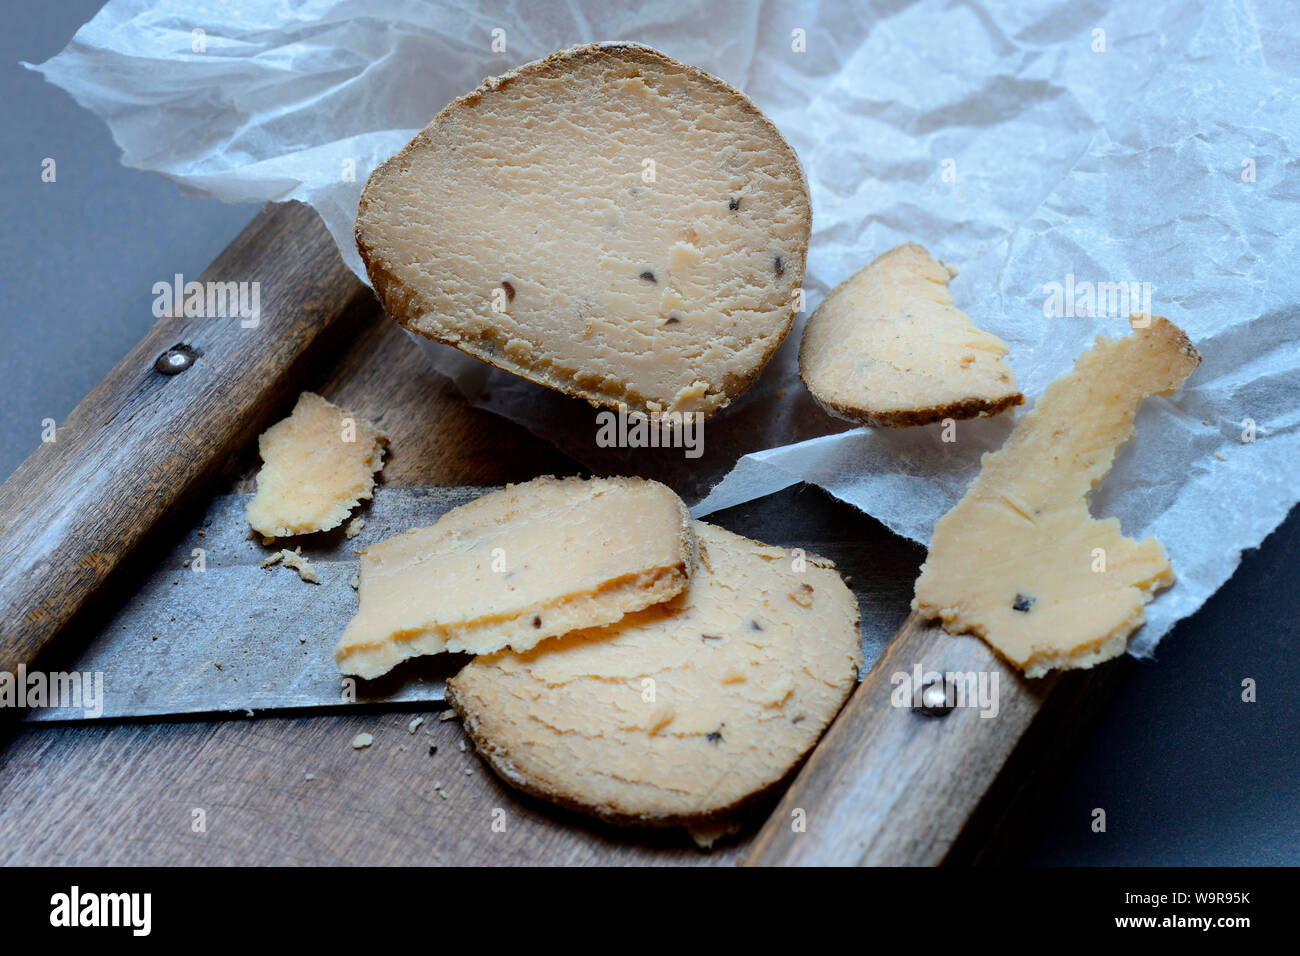 Cheese Belper Knolle Stock Photo